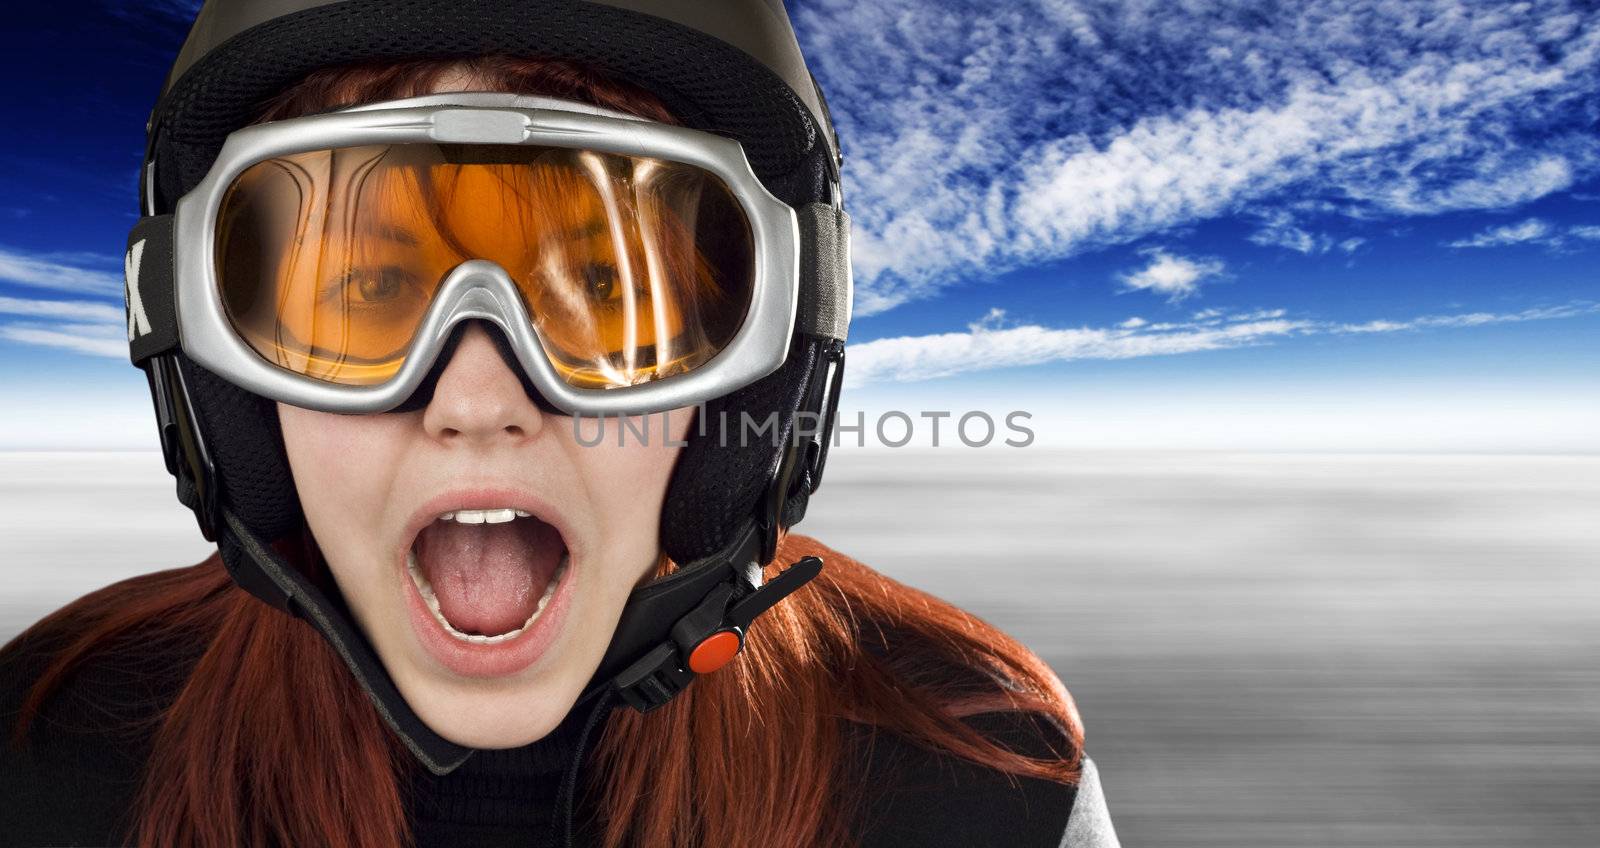 Cute girl with red hair wearing a ski helmet and orange goggles acting surprised and yelling. Feeling cold.

Studio shot.